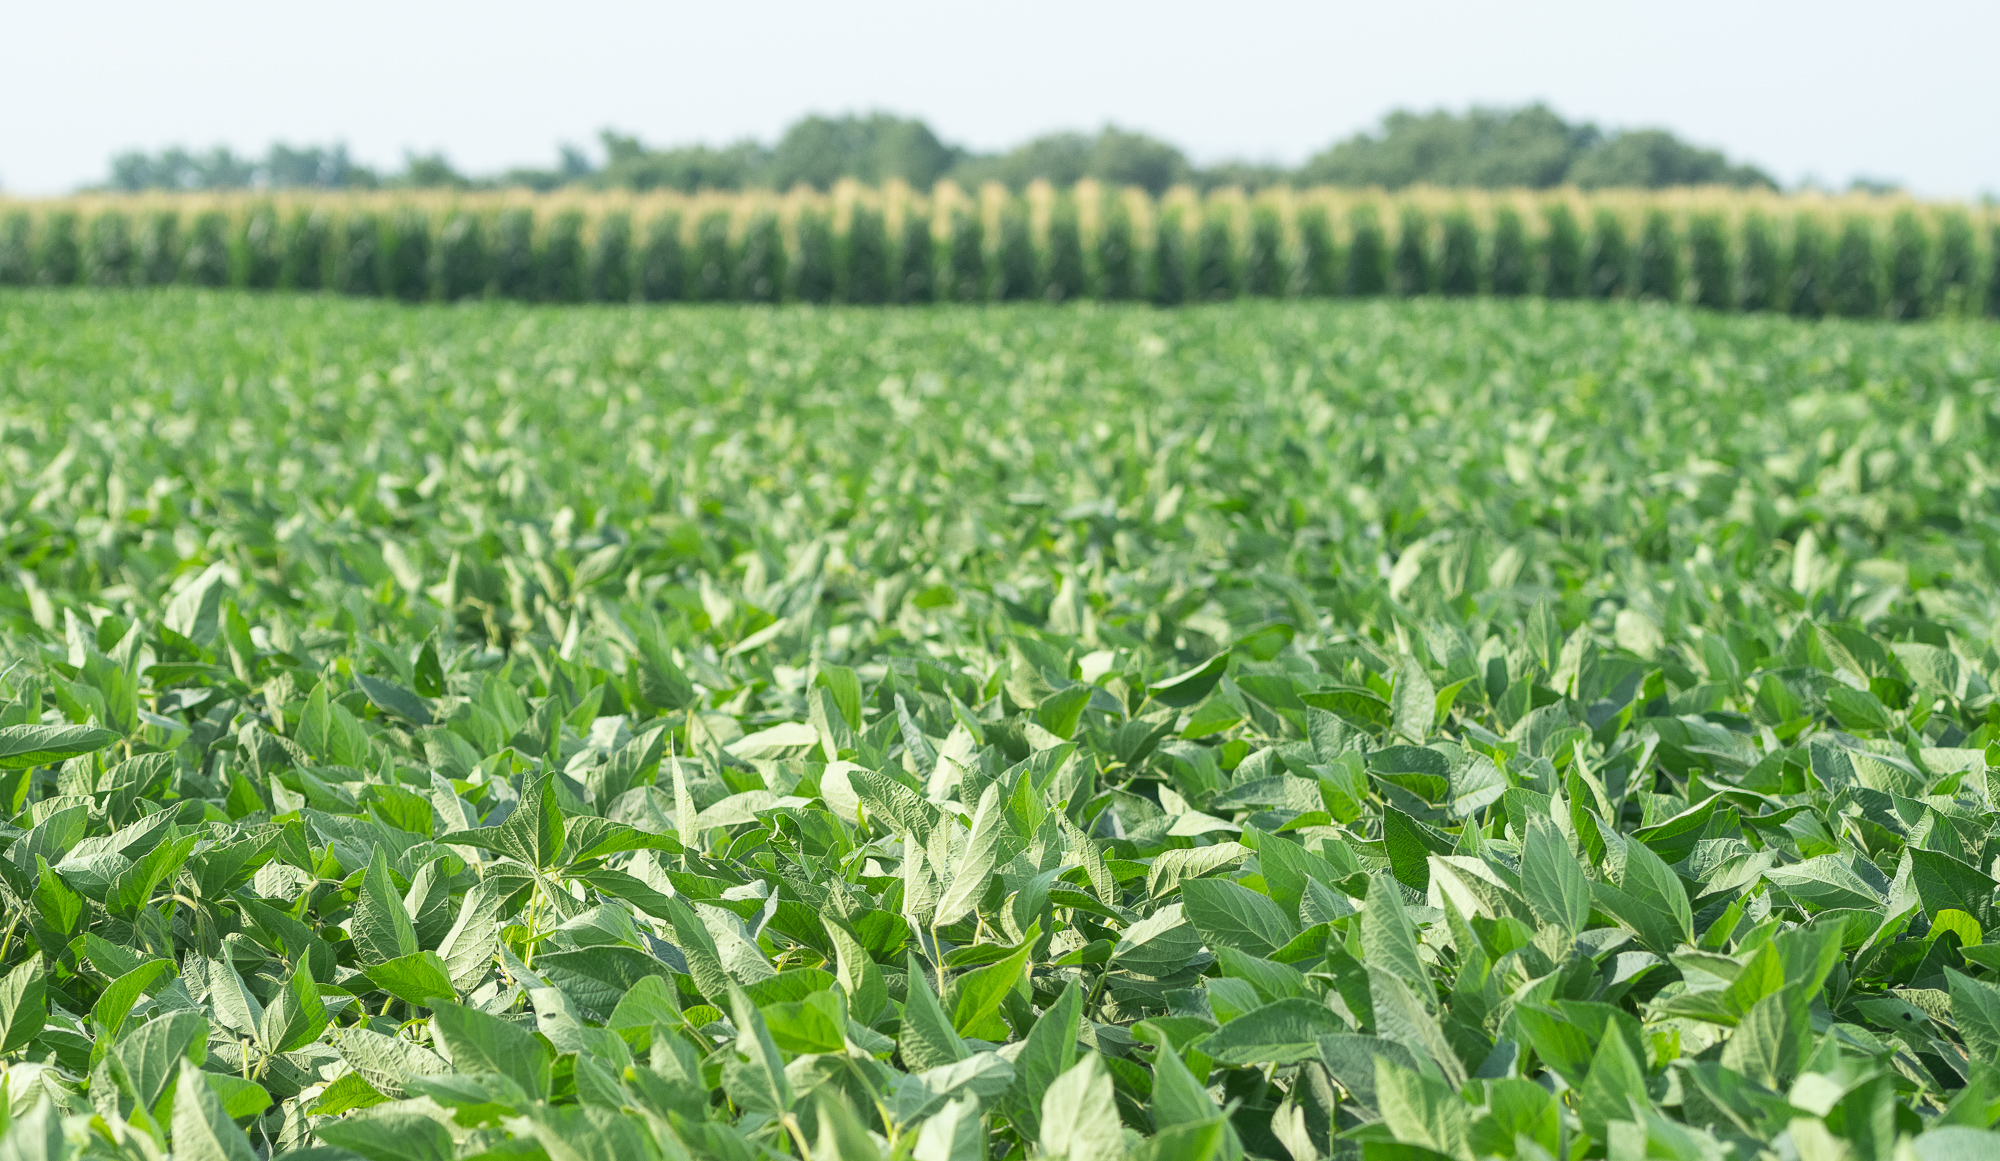 Rows of green soybean plants